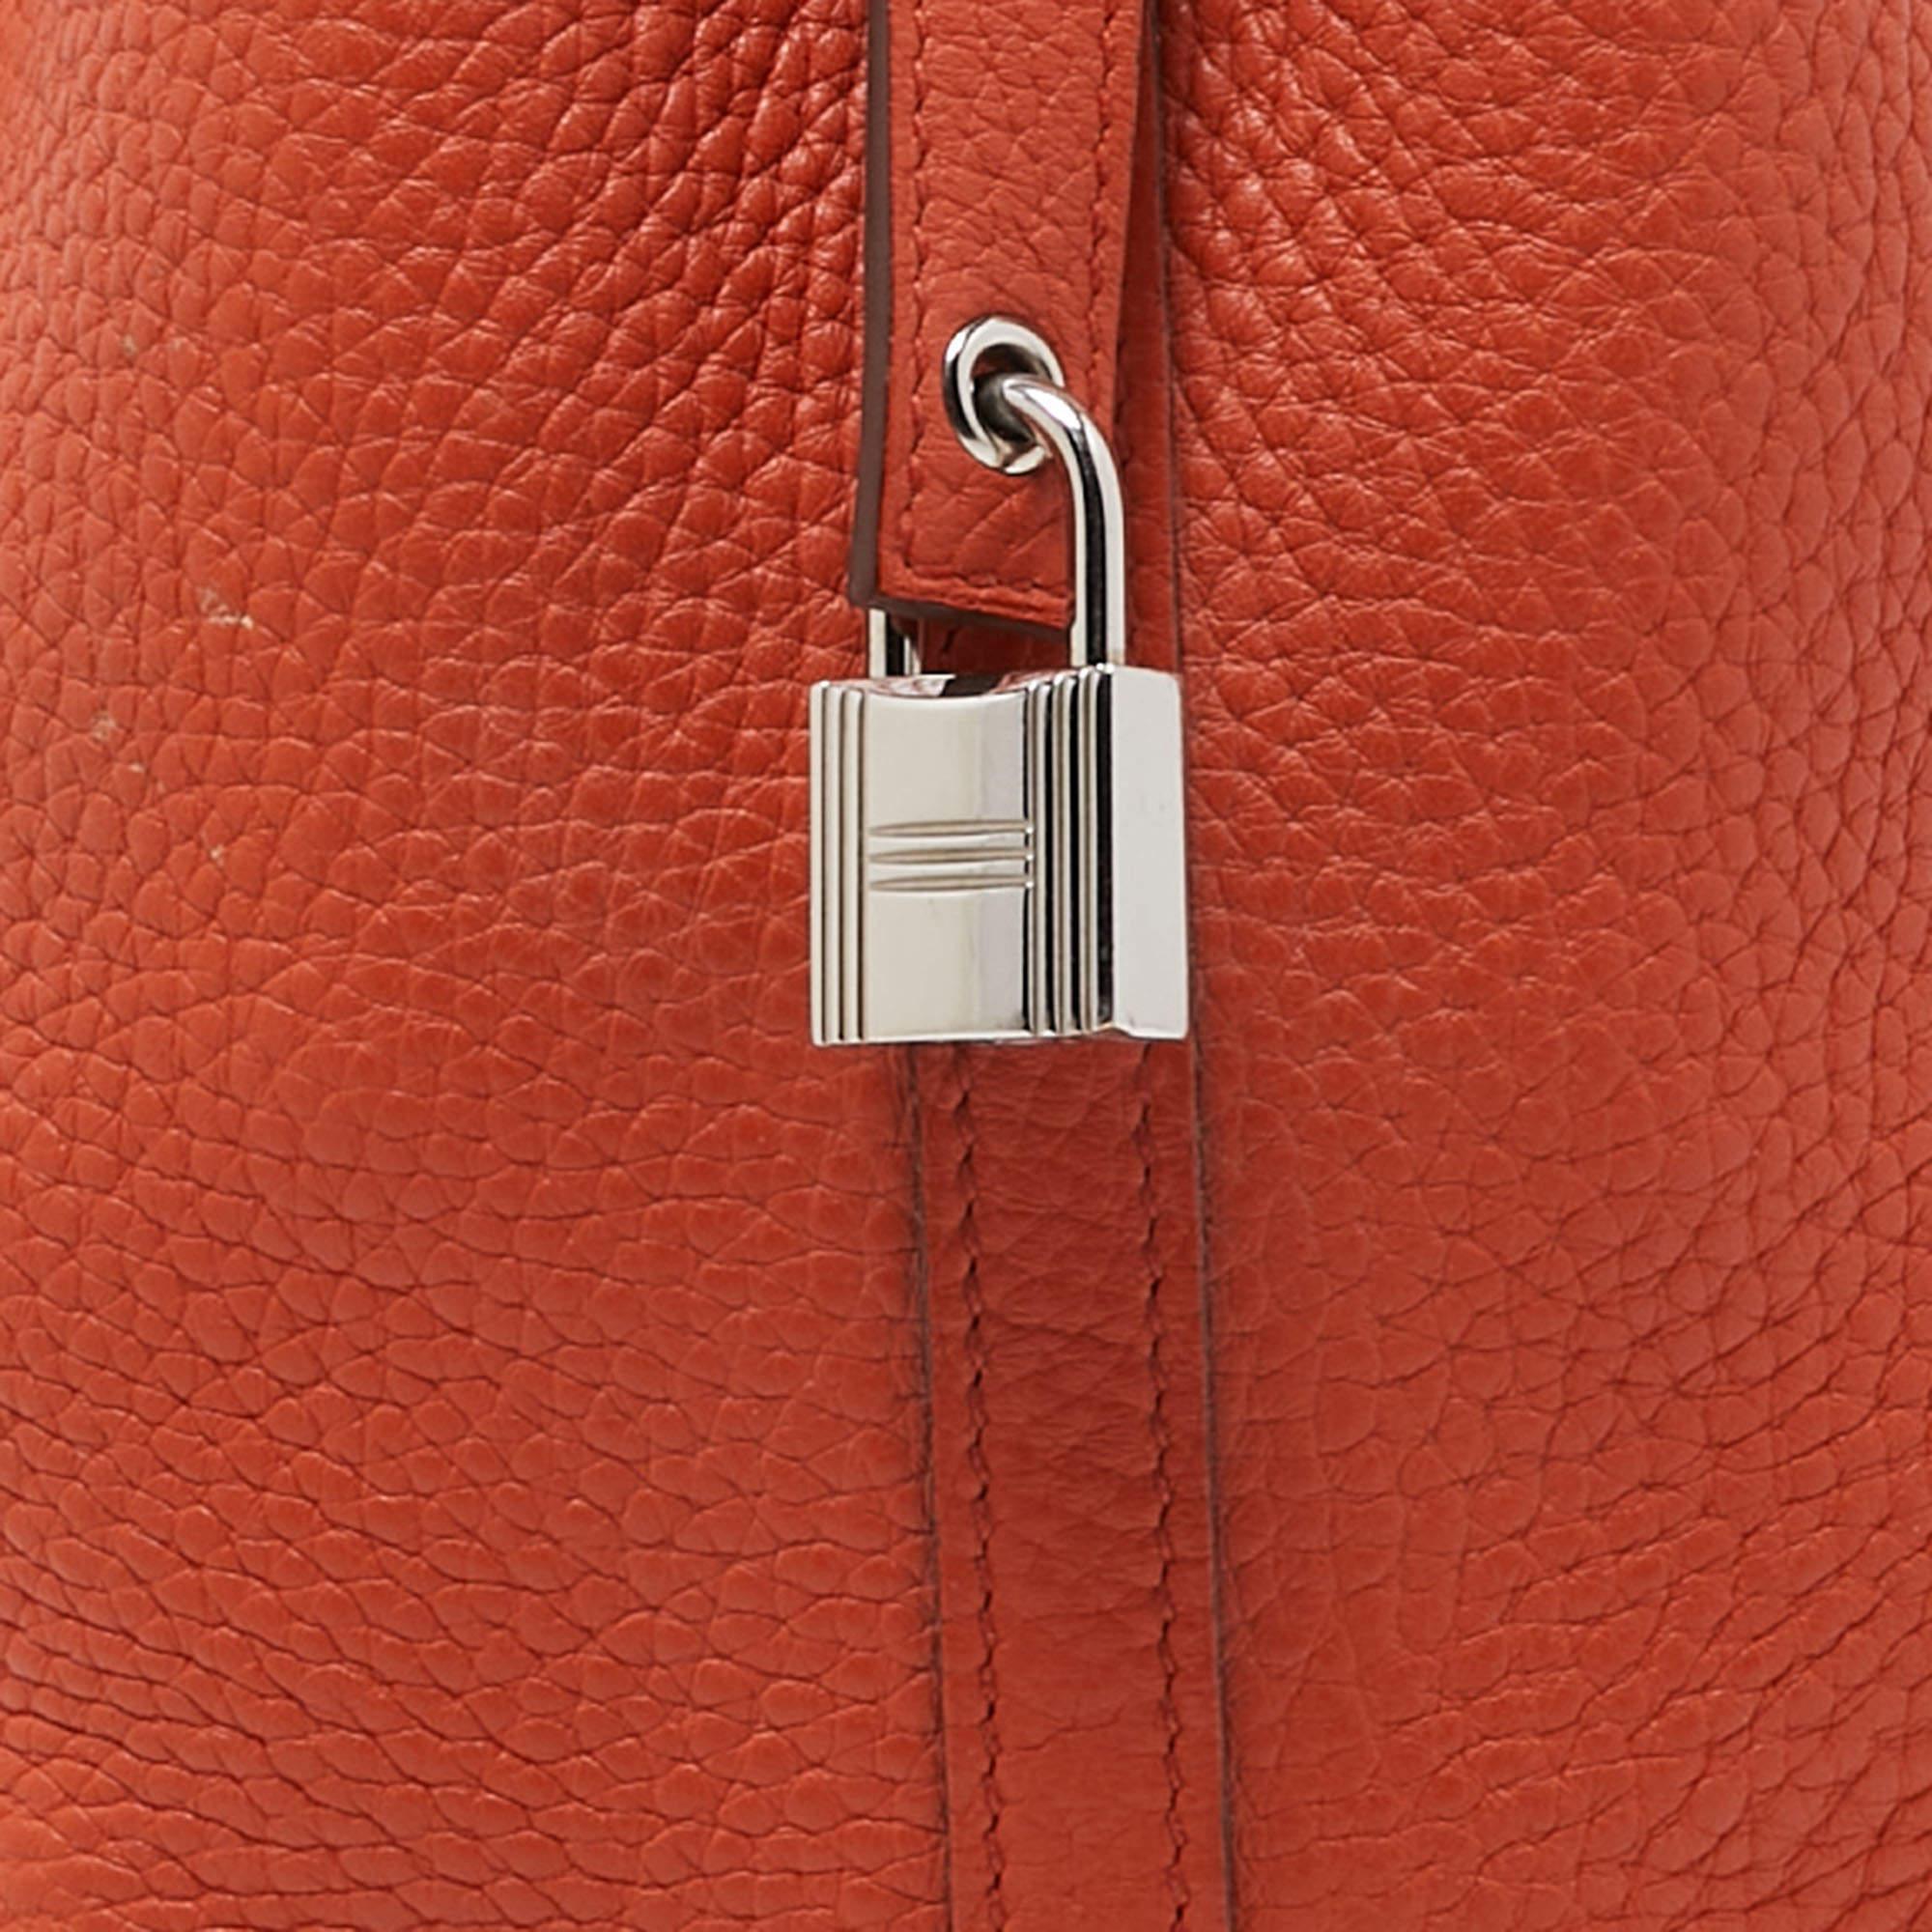 Hermes Terre Battue Taurillon Clemence Leather Picotin Lock 18 Bag 9